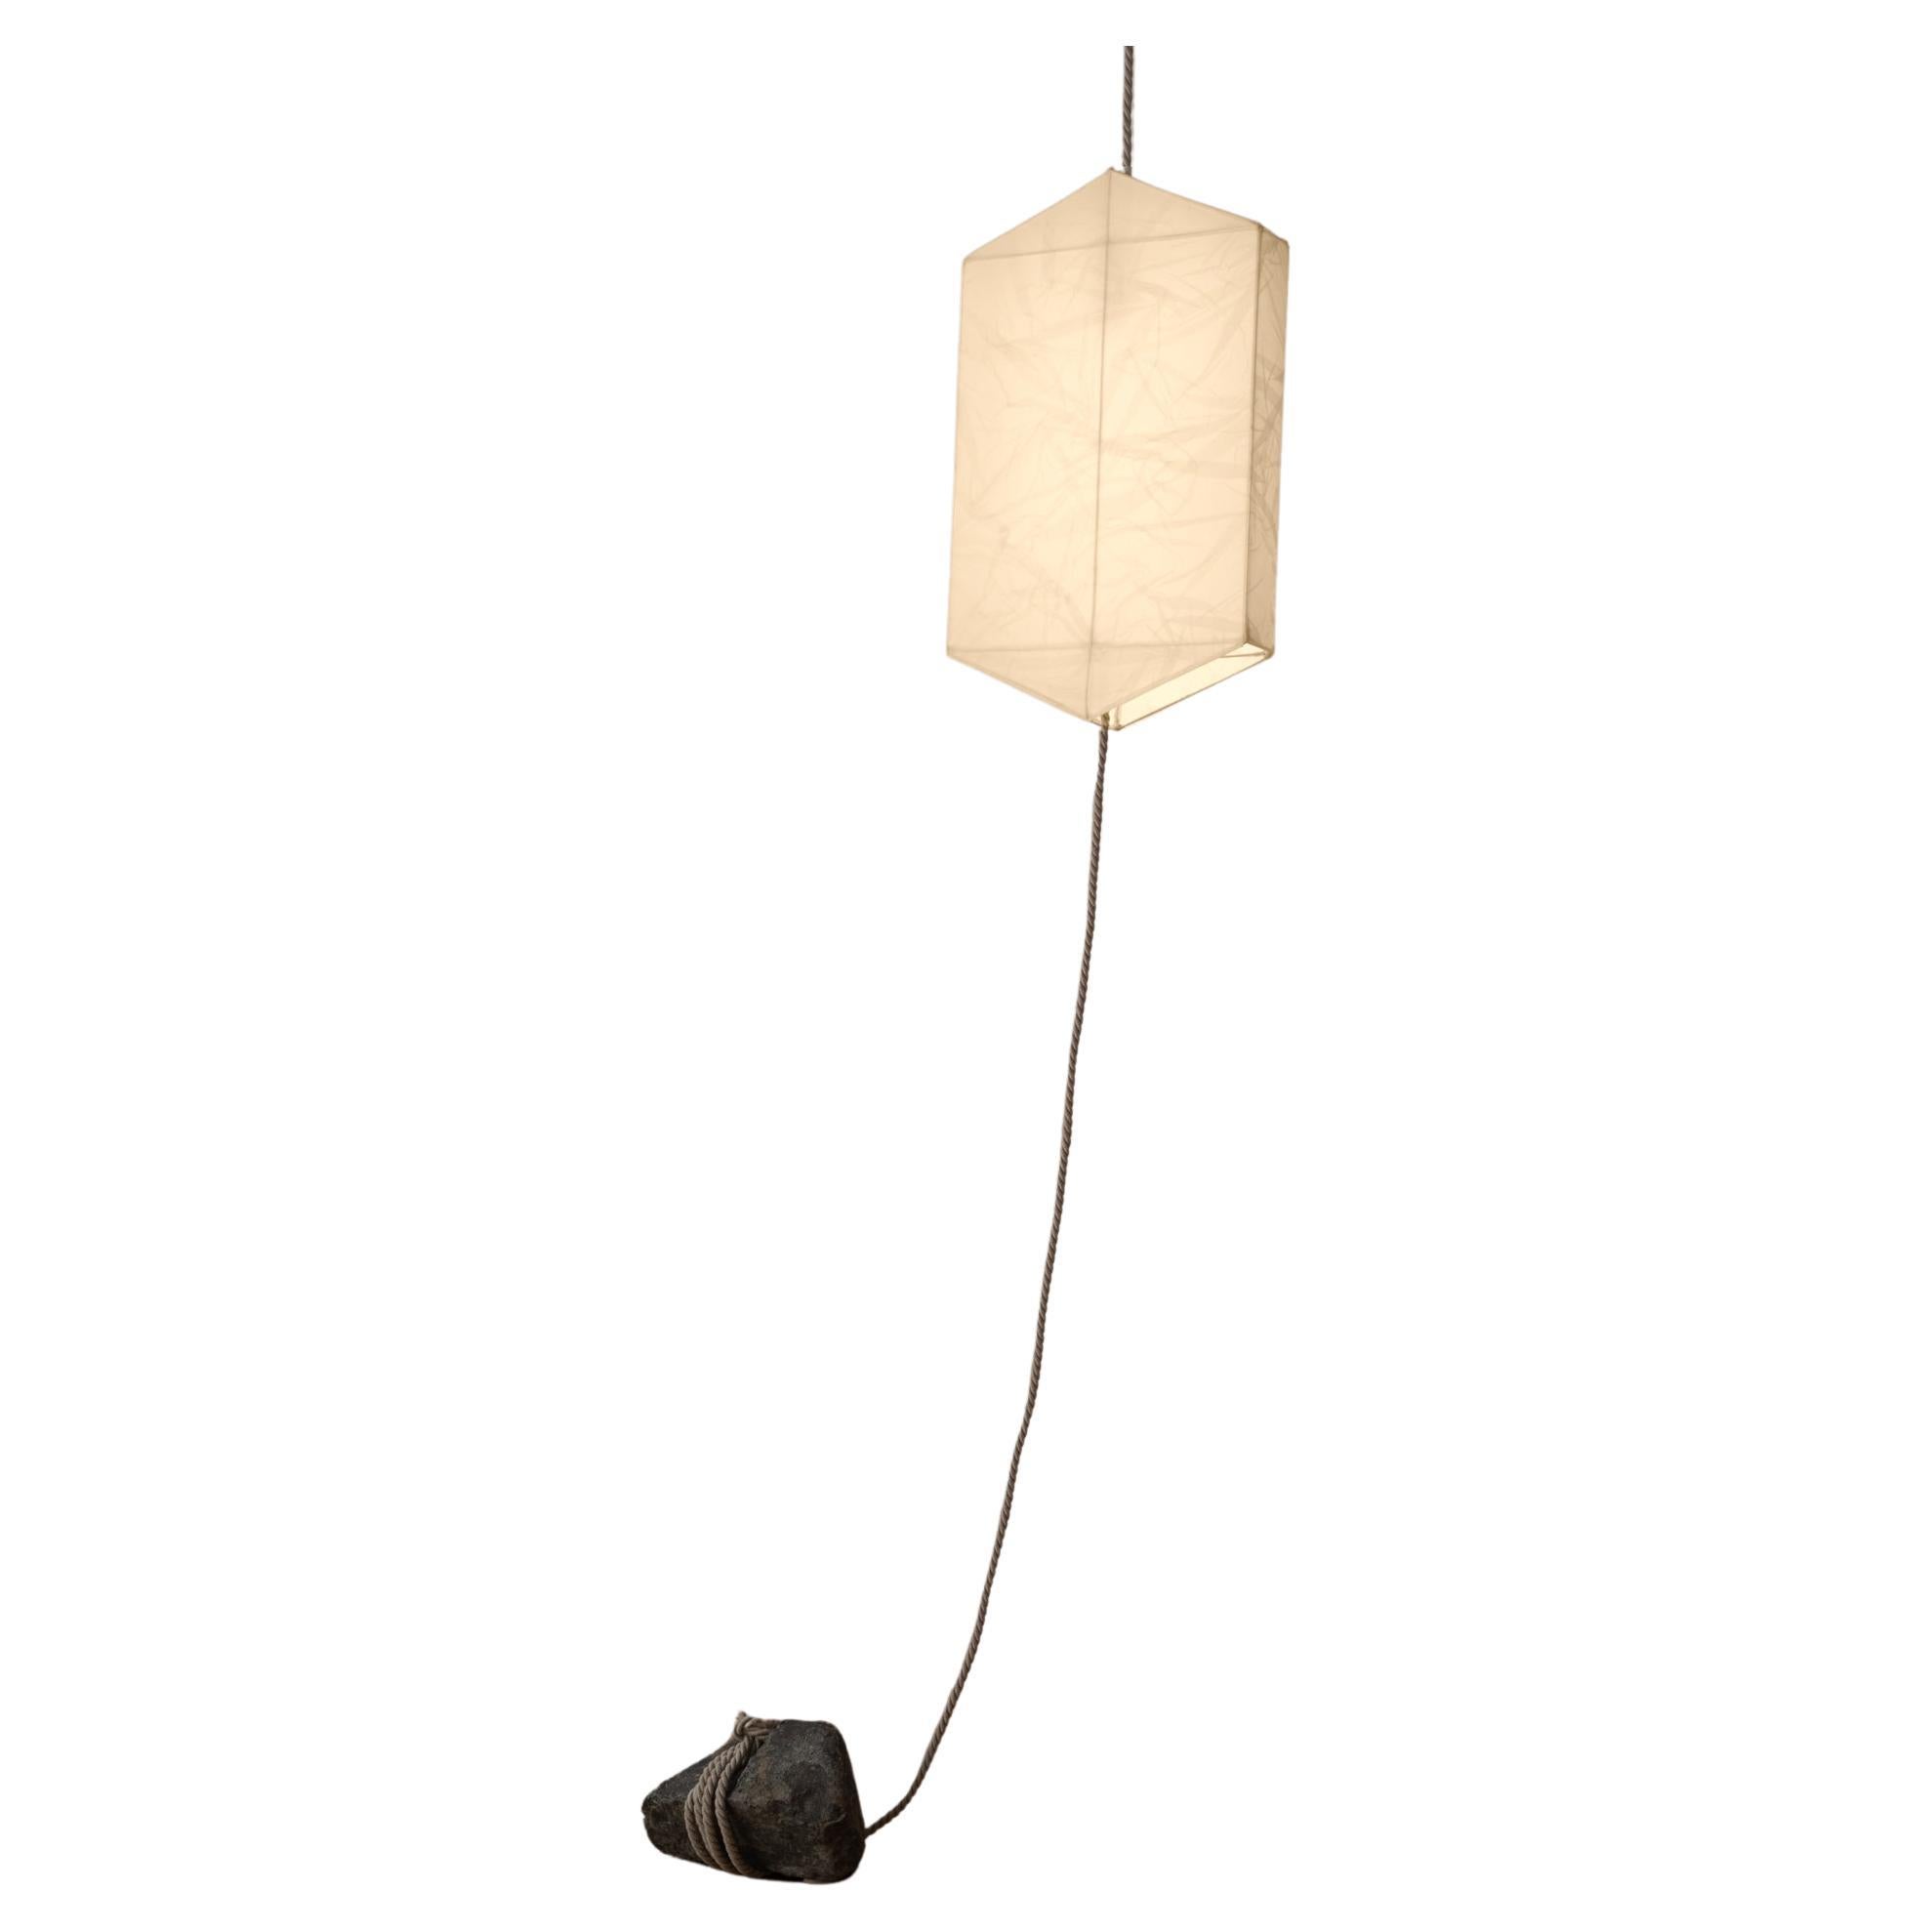 One-of-a-Kind Hanging Lantern-style Lamp in Silk Organza, Rope and Raw Stone For Sale